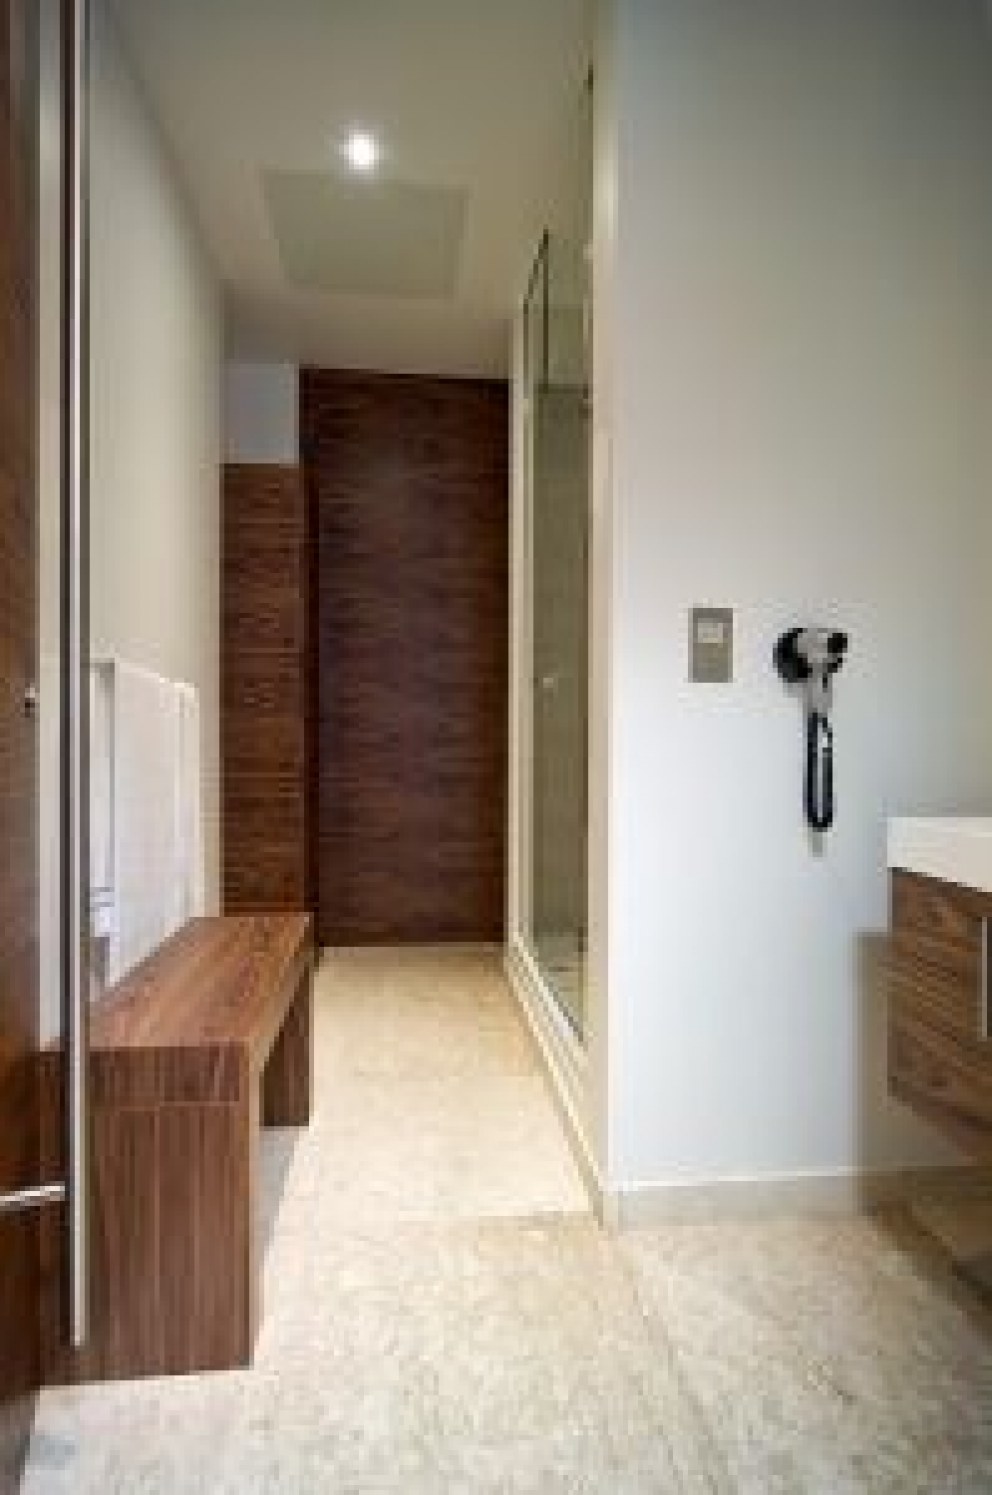 Fund Management Office | Shower and changing rooms | Interior Designers